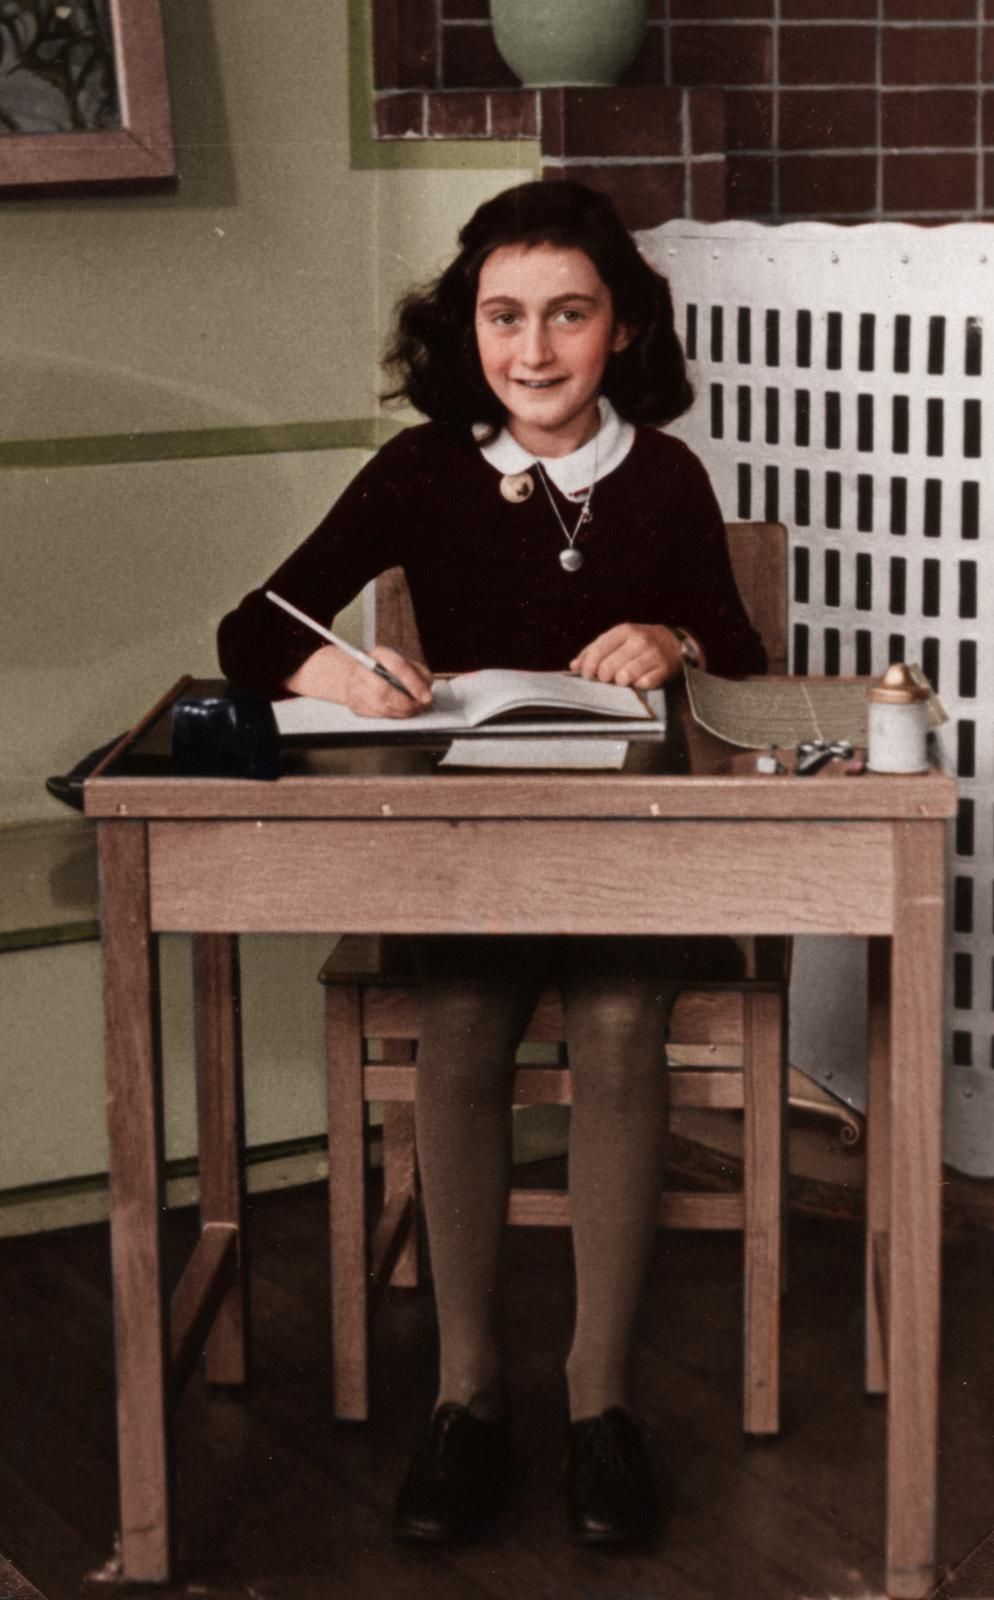  Anne Frank Hintergrundbild 994x1600. Imgur: The most awesome image on the Internet. Anne frank, History, Women in history